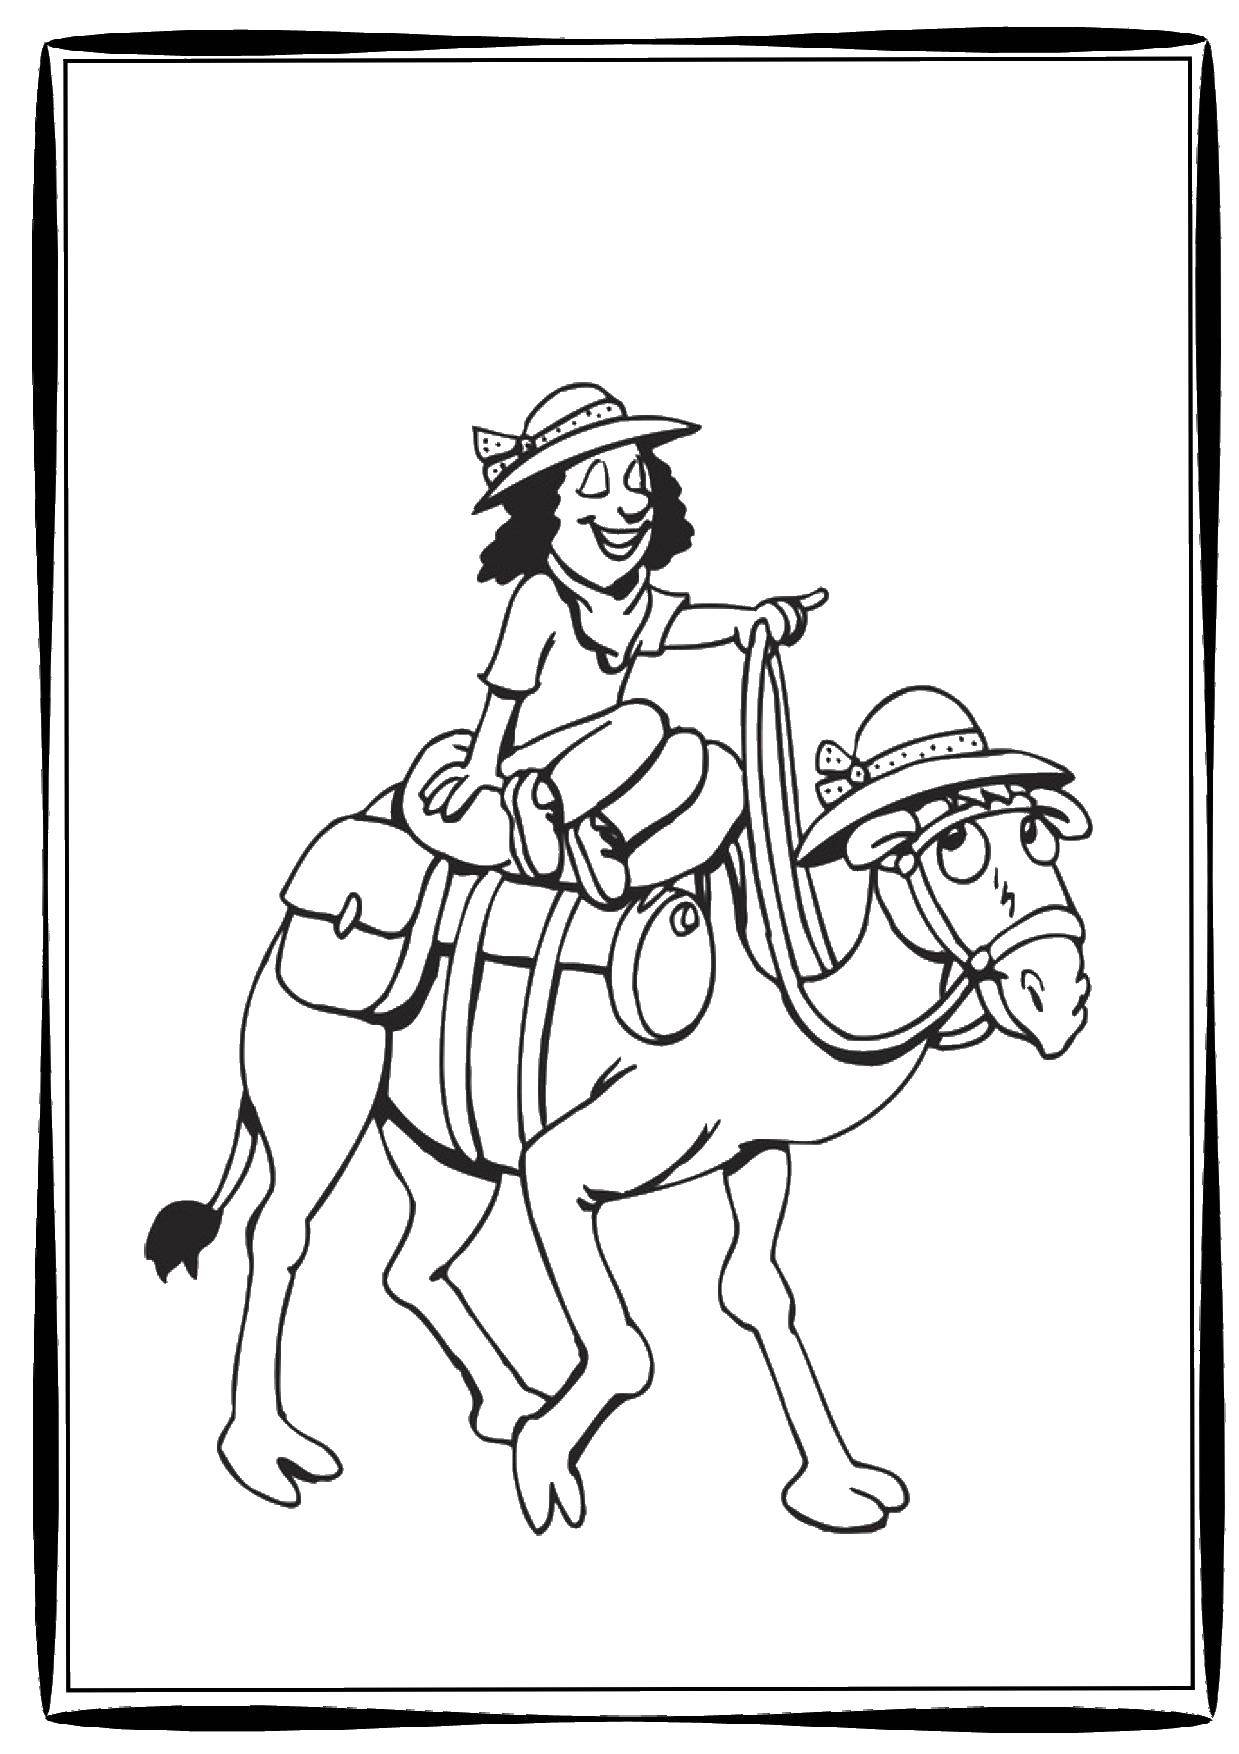 Coloring The girl on the camel. Category coloring. Tags:  girl, camel, hats.